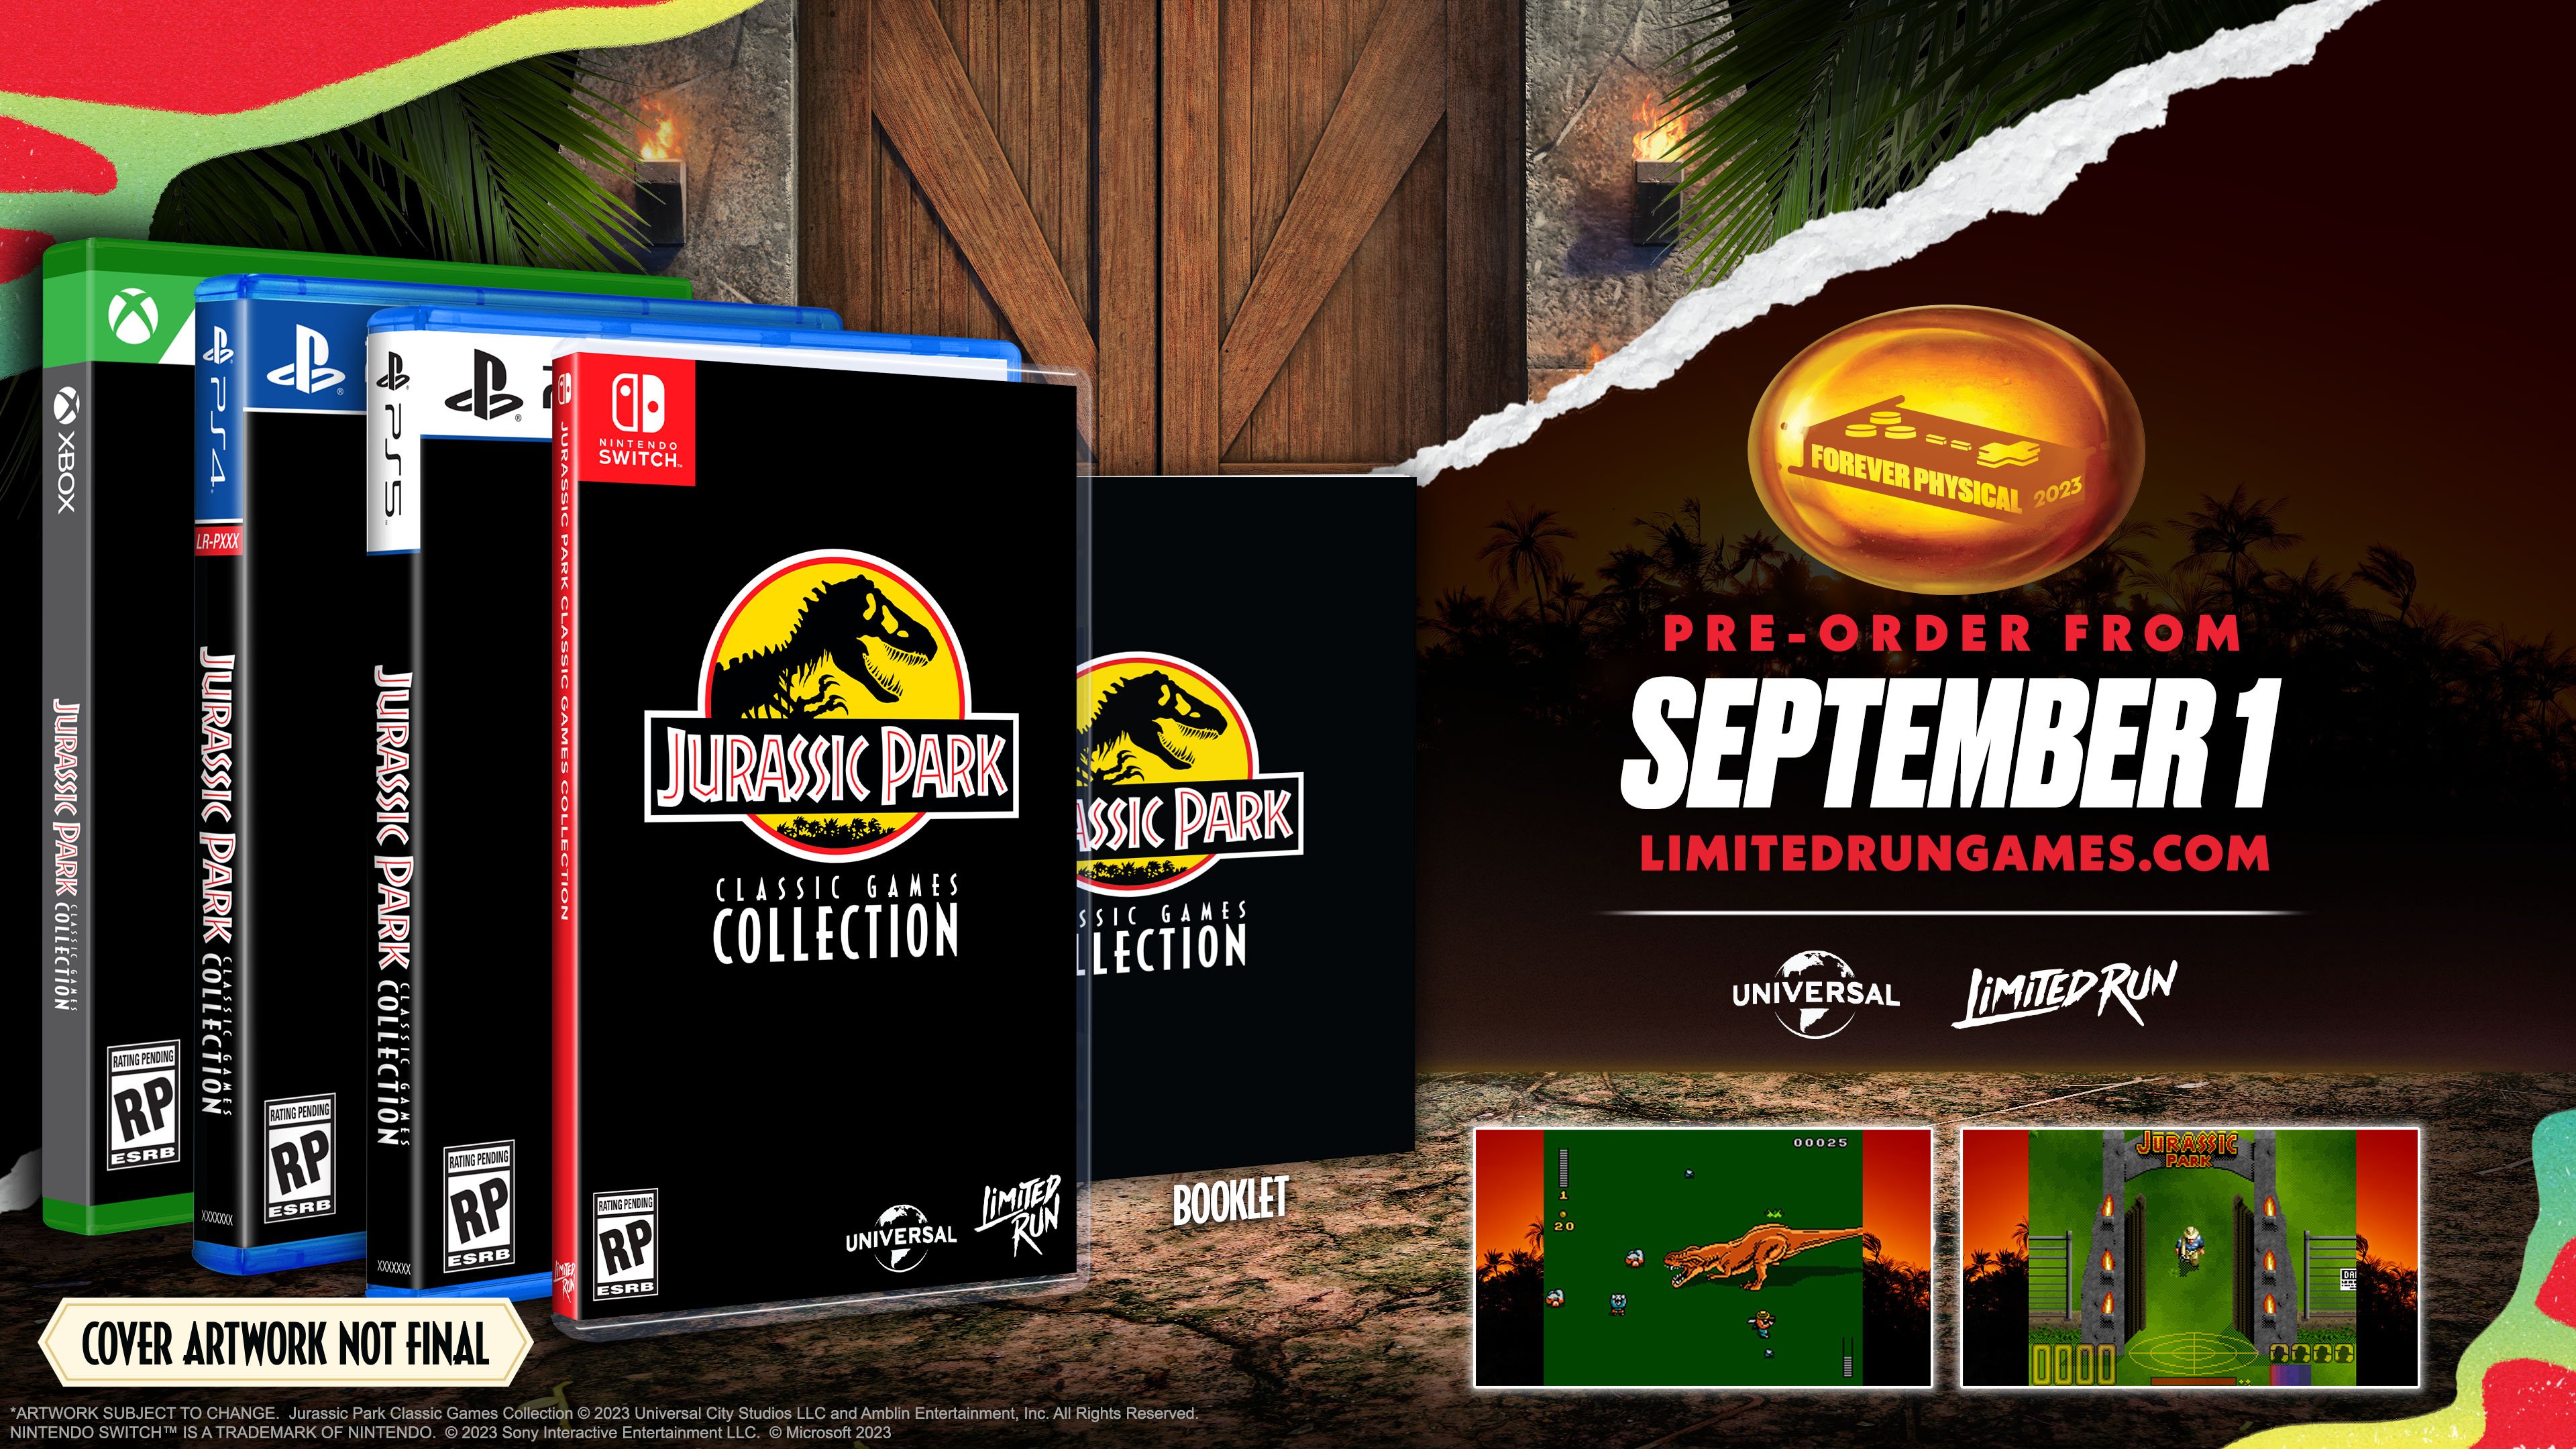 Jurassic Park Classic Games Collection announced for PS5, Xbox Series